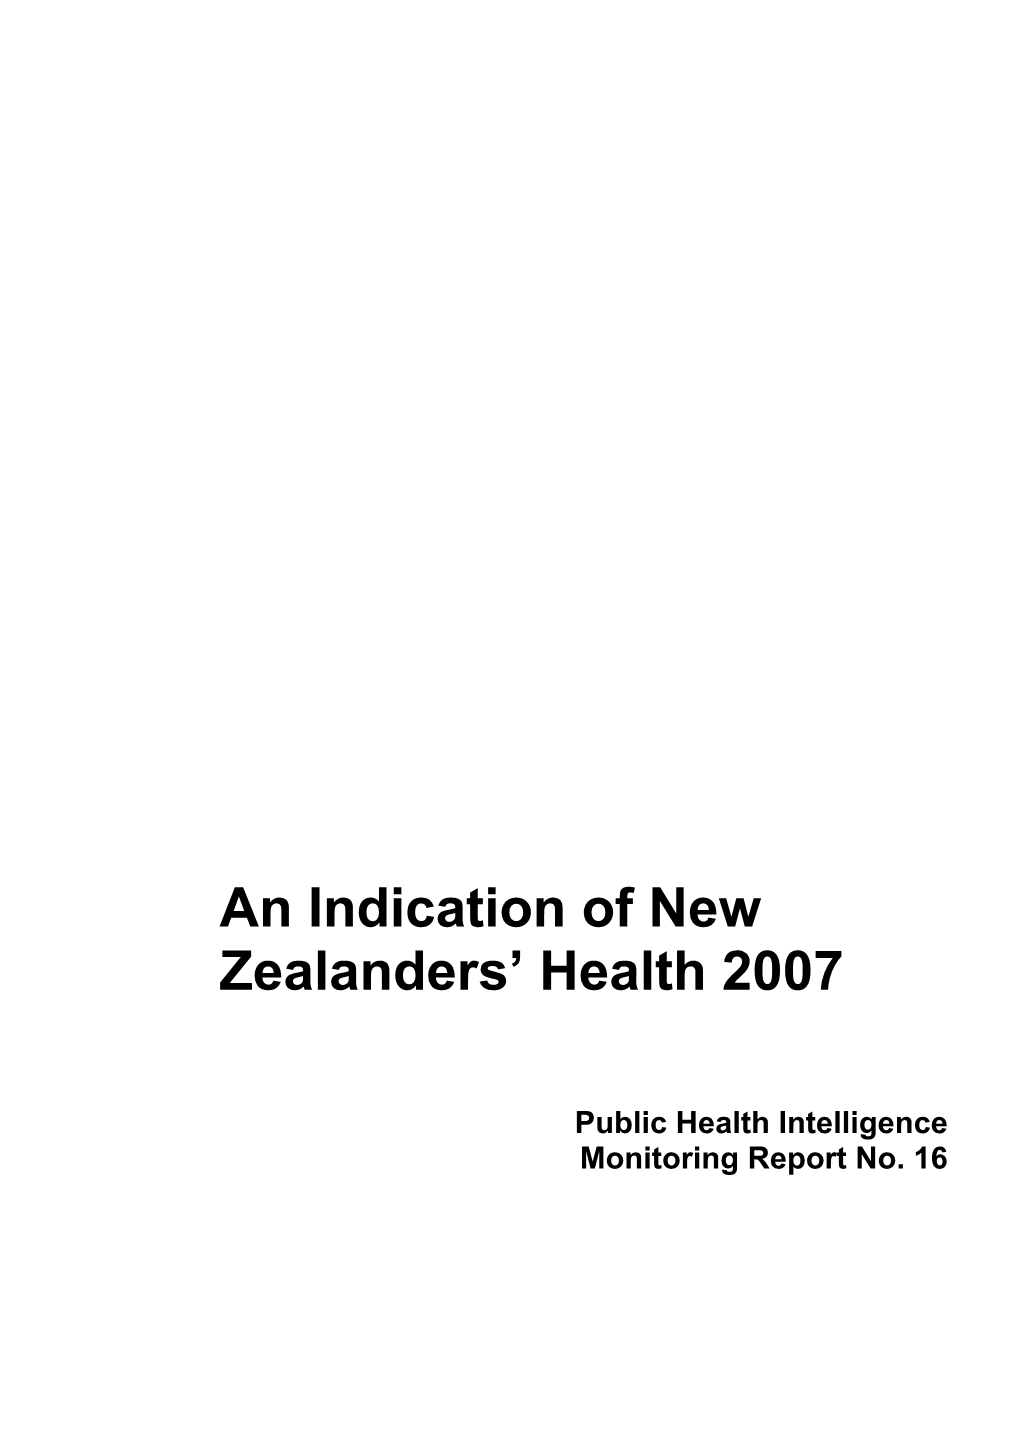 An Indication of New Zealanders' Health 2007